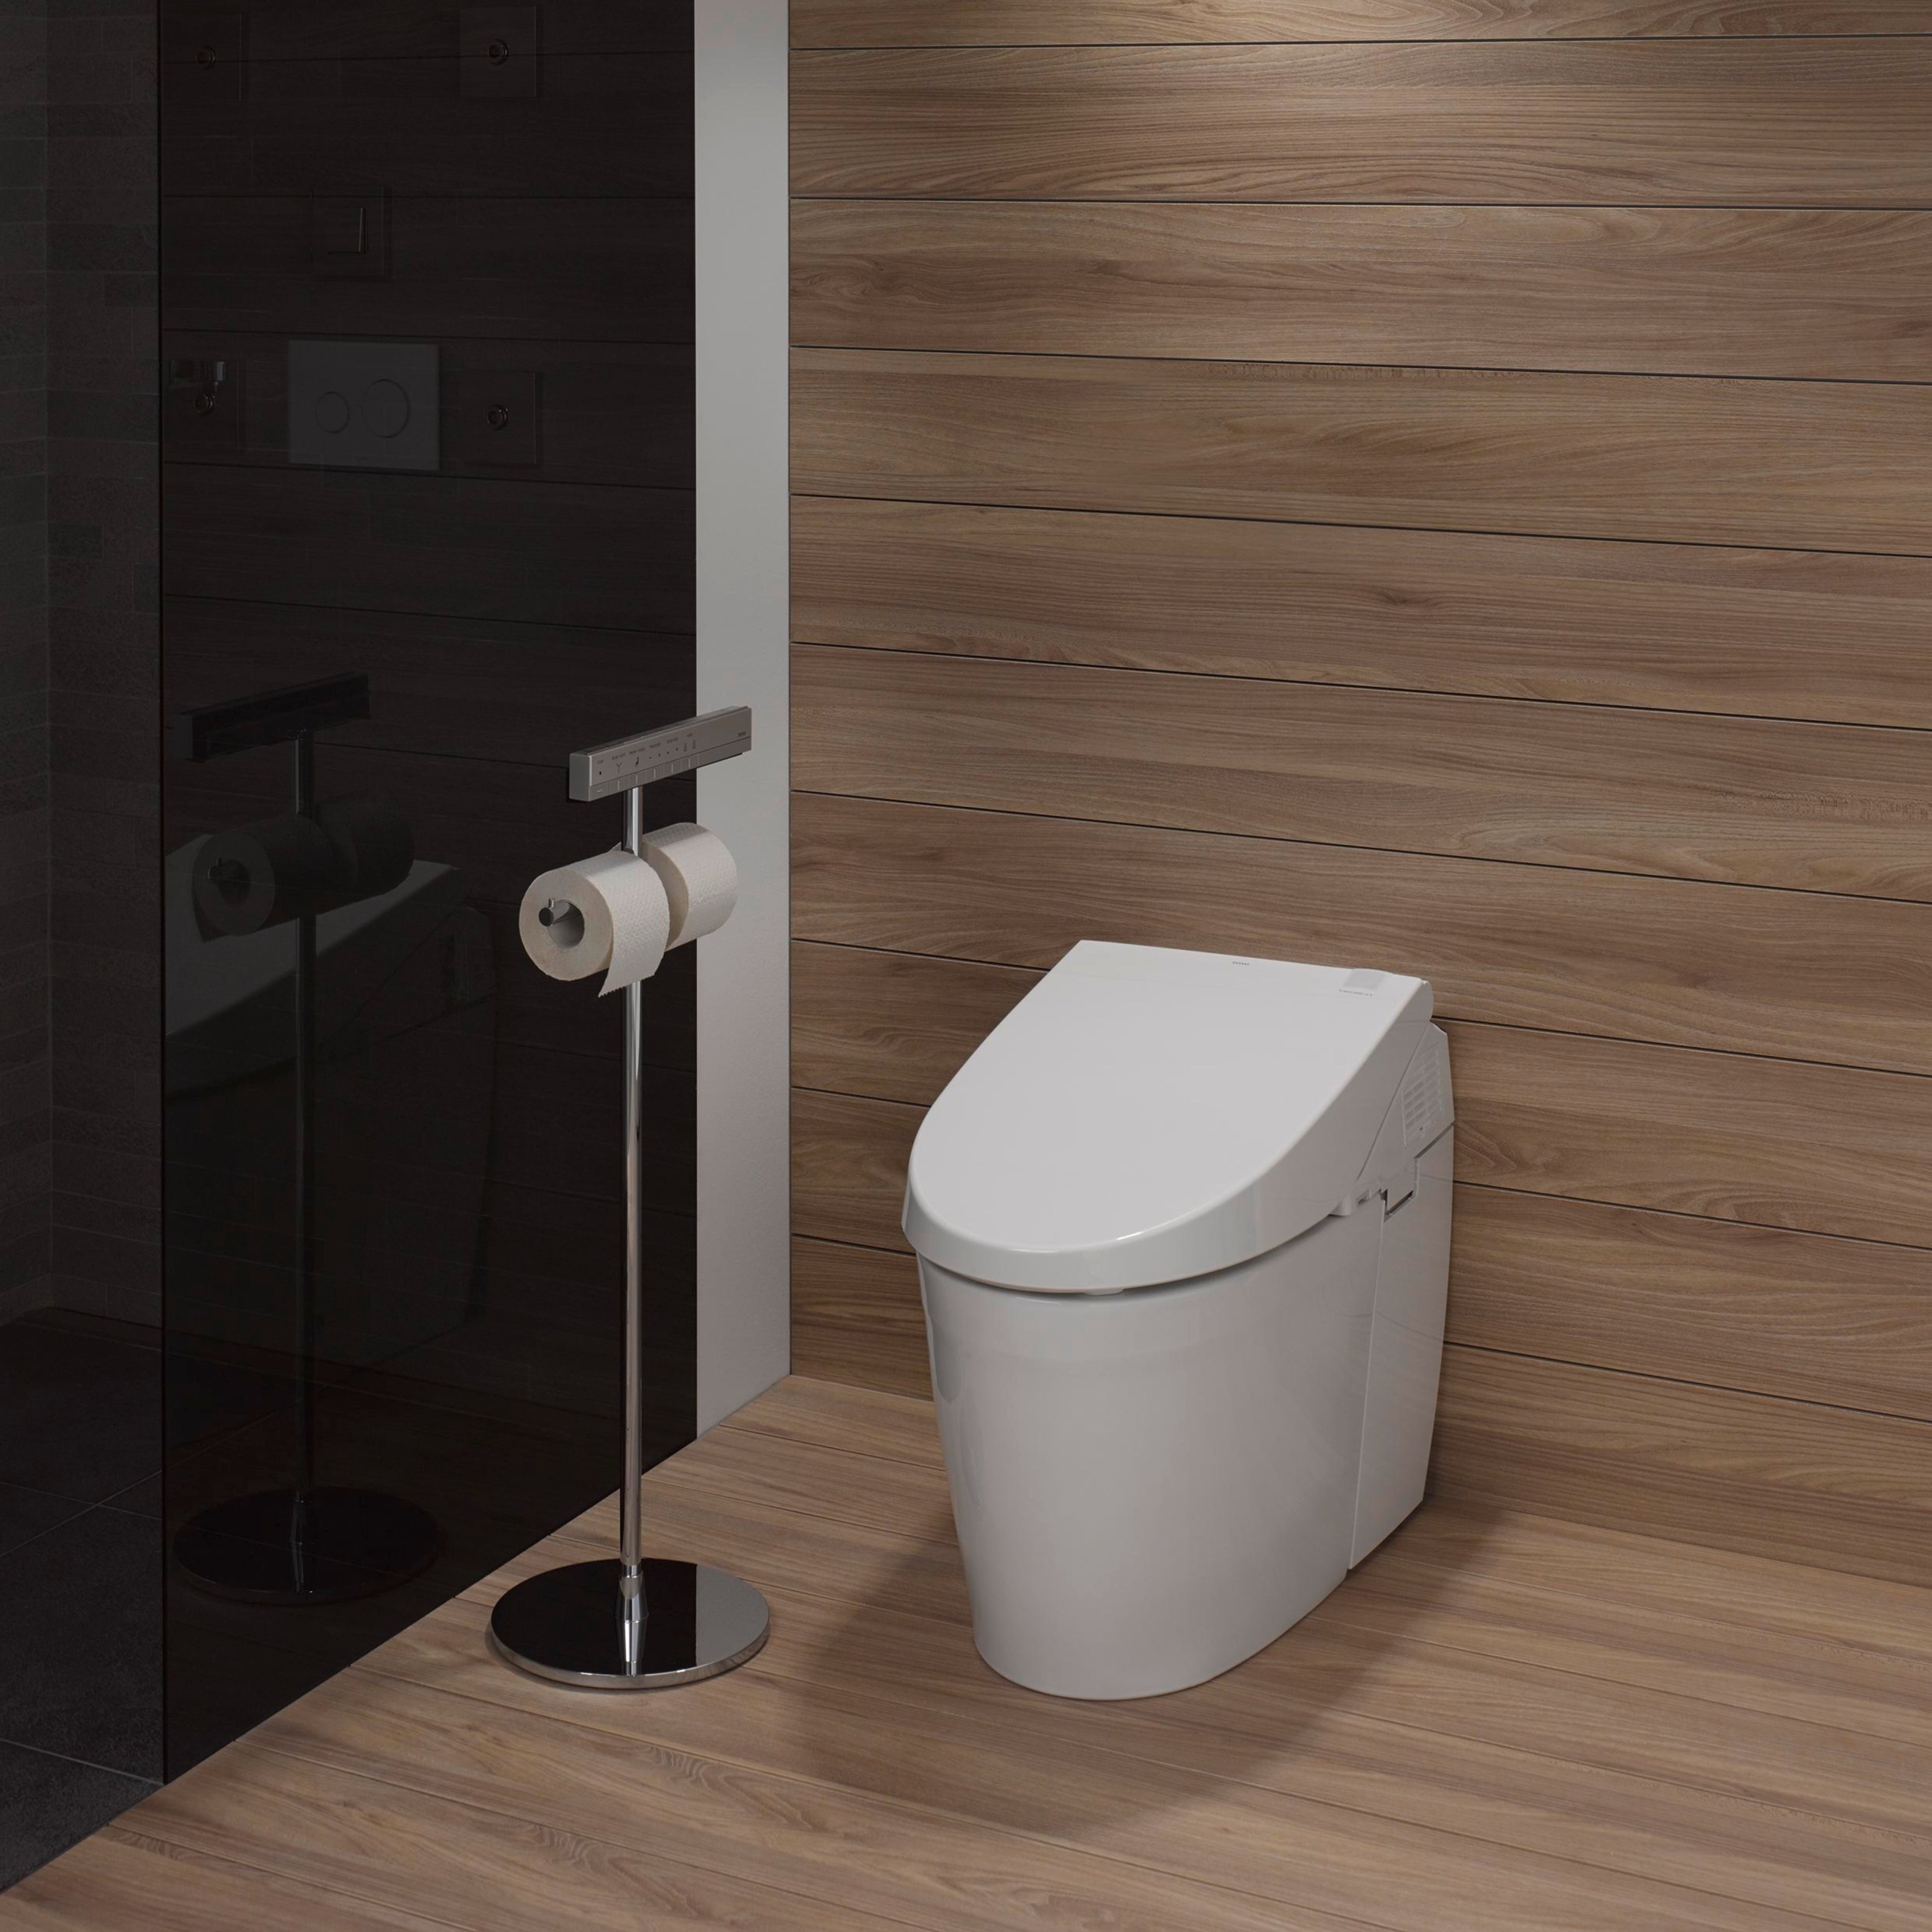 TOTO NEOREST AH INTEGRATED TOILET AND WASHLET W/ REMOTE CONTROL PACKAGE ELONGATE GLOSS WHITE